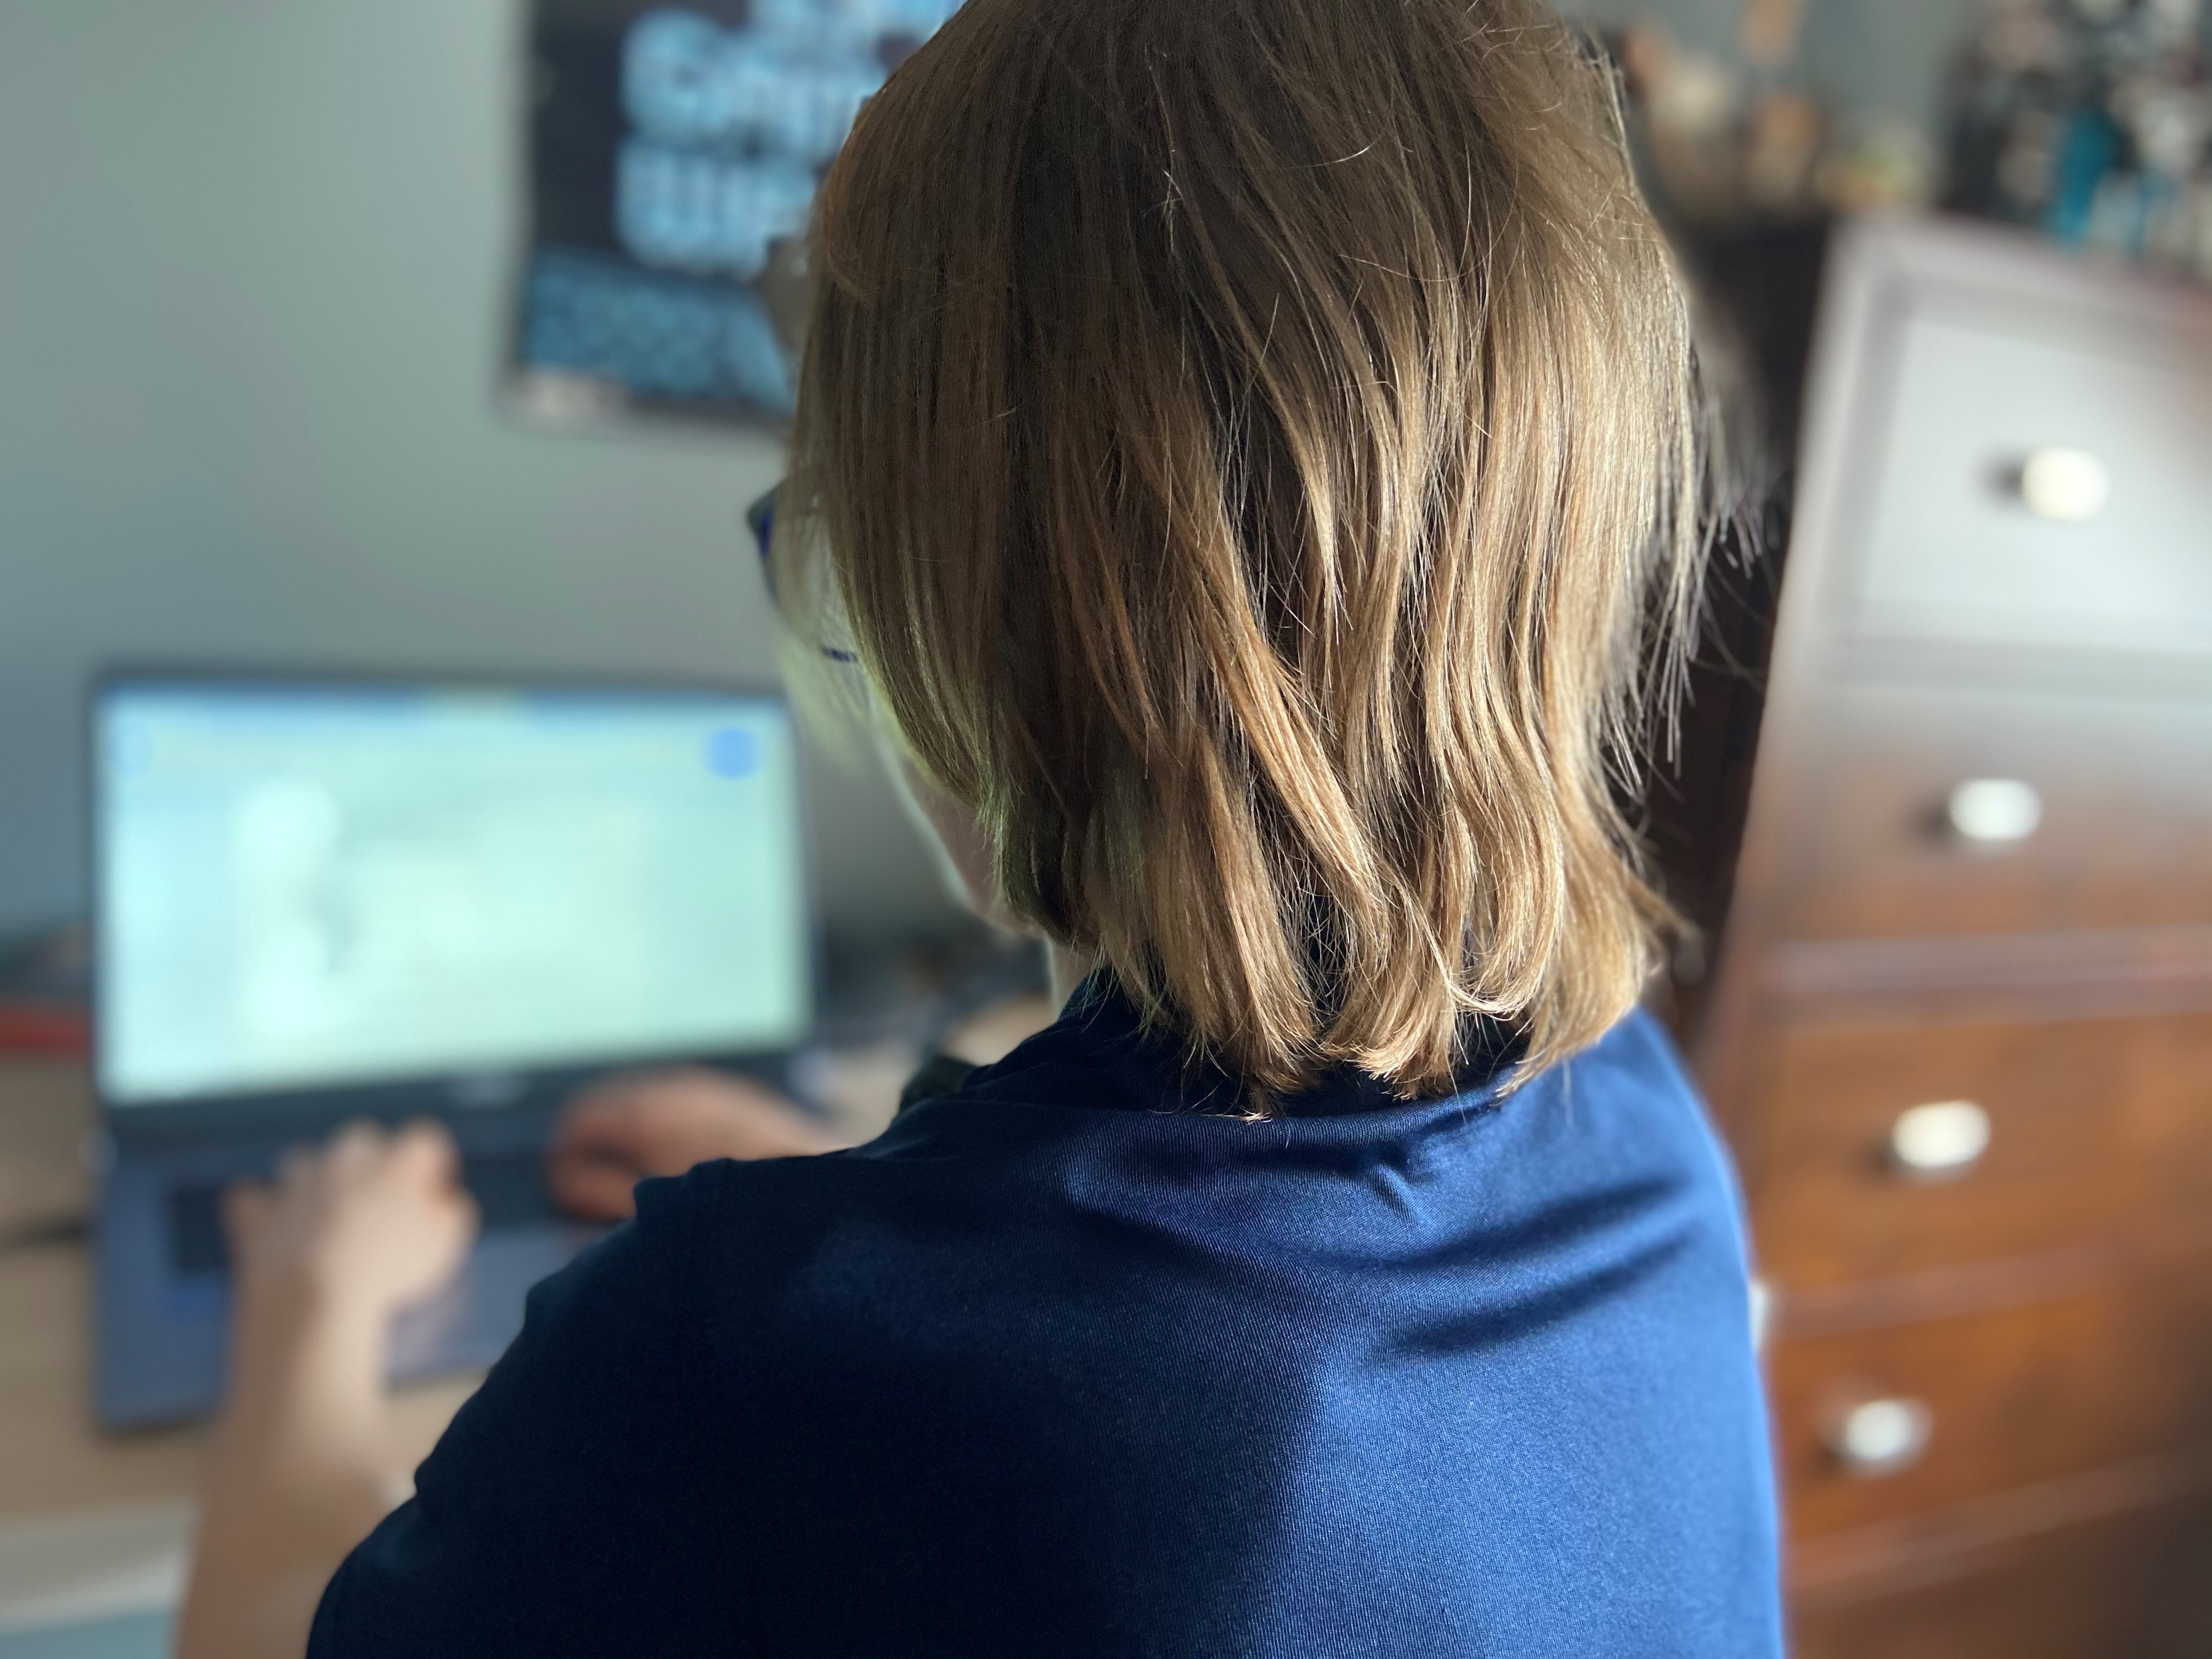 National Online Safety on X: The biggest-selling video game of all time  🏆😮 However, even the mighty Minecraft isn't totally immune to # OnlineSafety risks. Our updated #WakeUpWednesday guide brings trusted  adults the